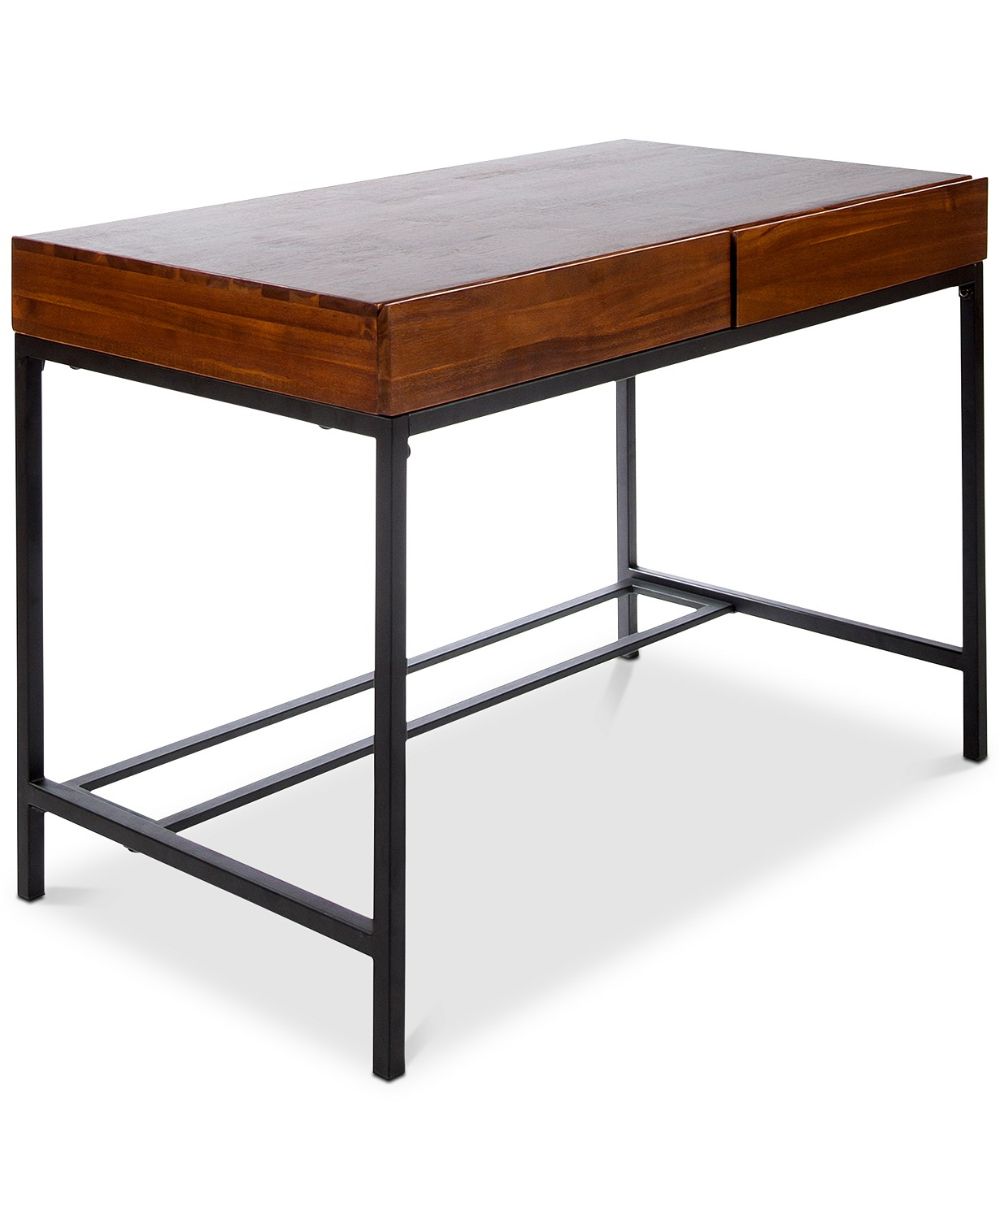 Noble House Morgan Industrial Acacia Wood Storage Desk With Rustic Intended For Rustic Acacia Wooden 2 Drawer Executive Desks (View 3 of 15)